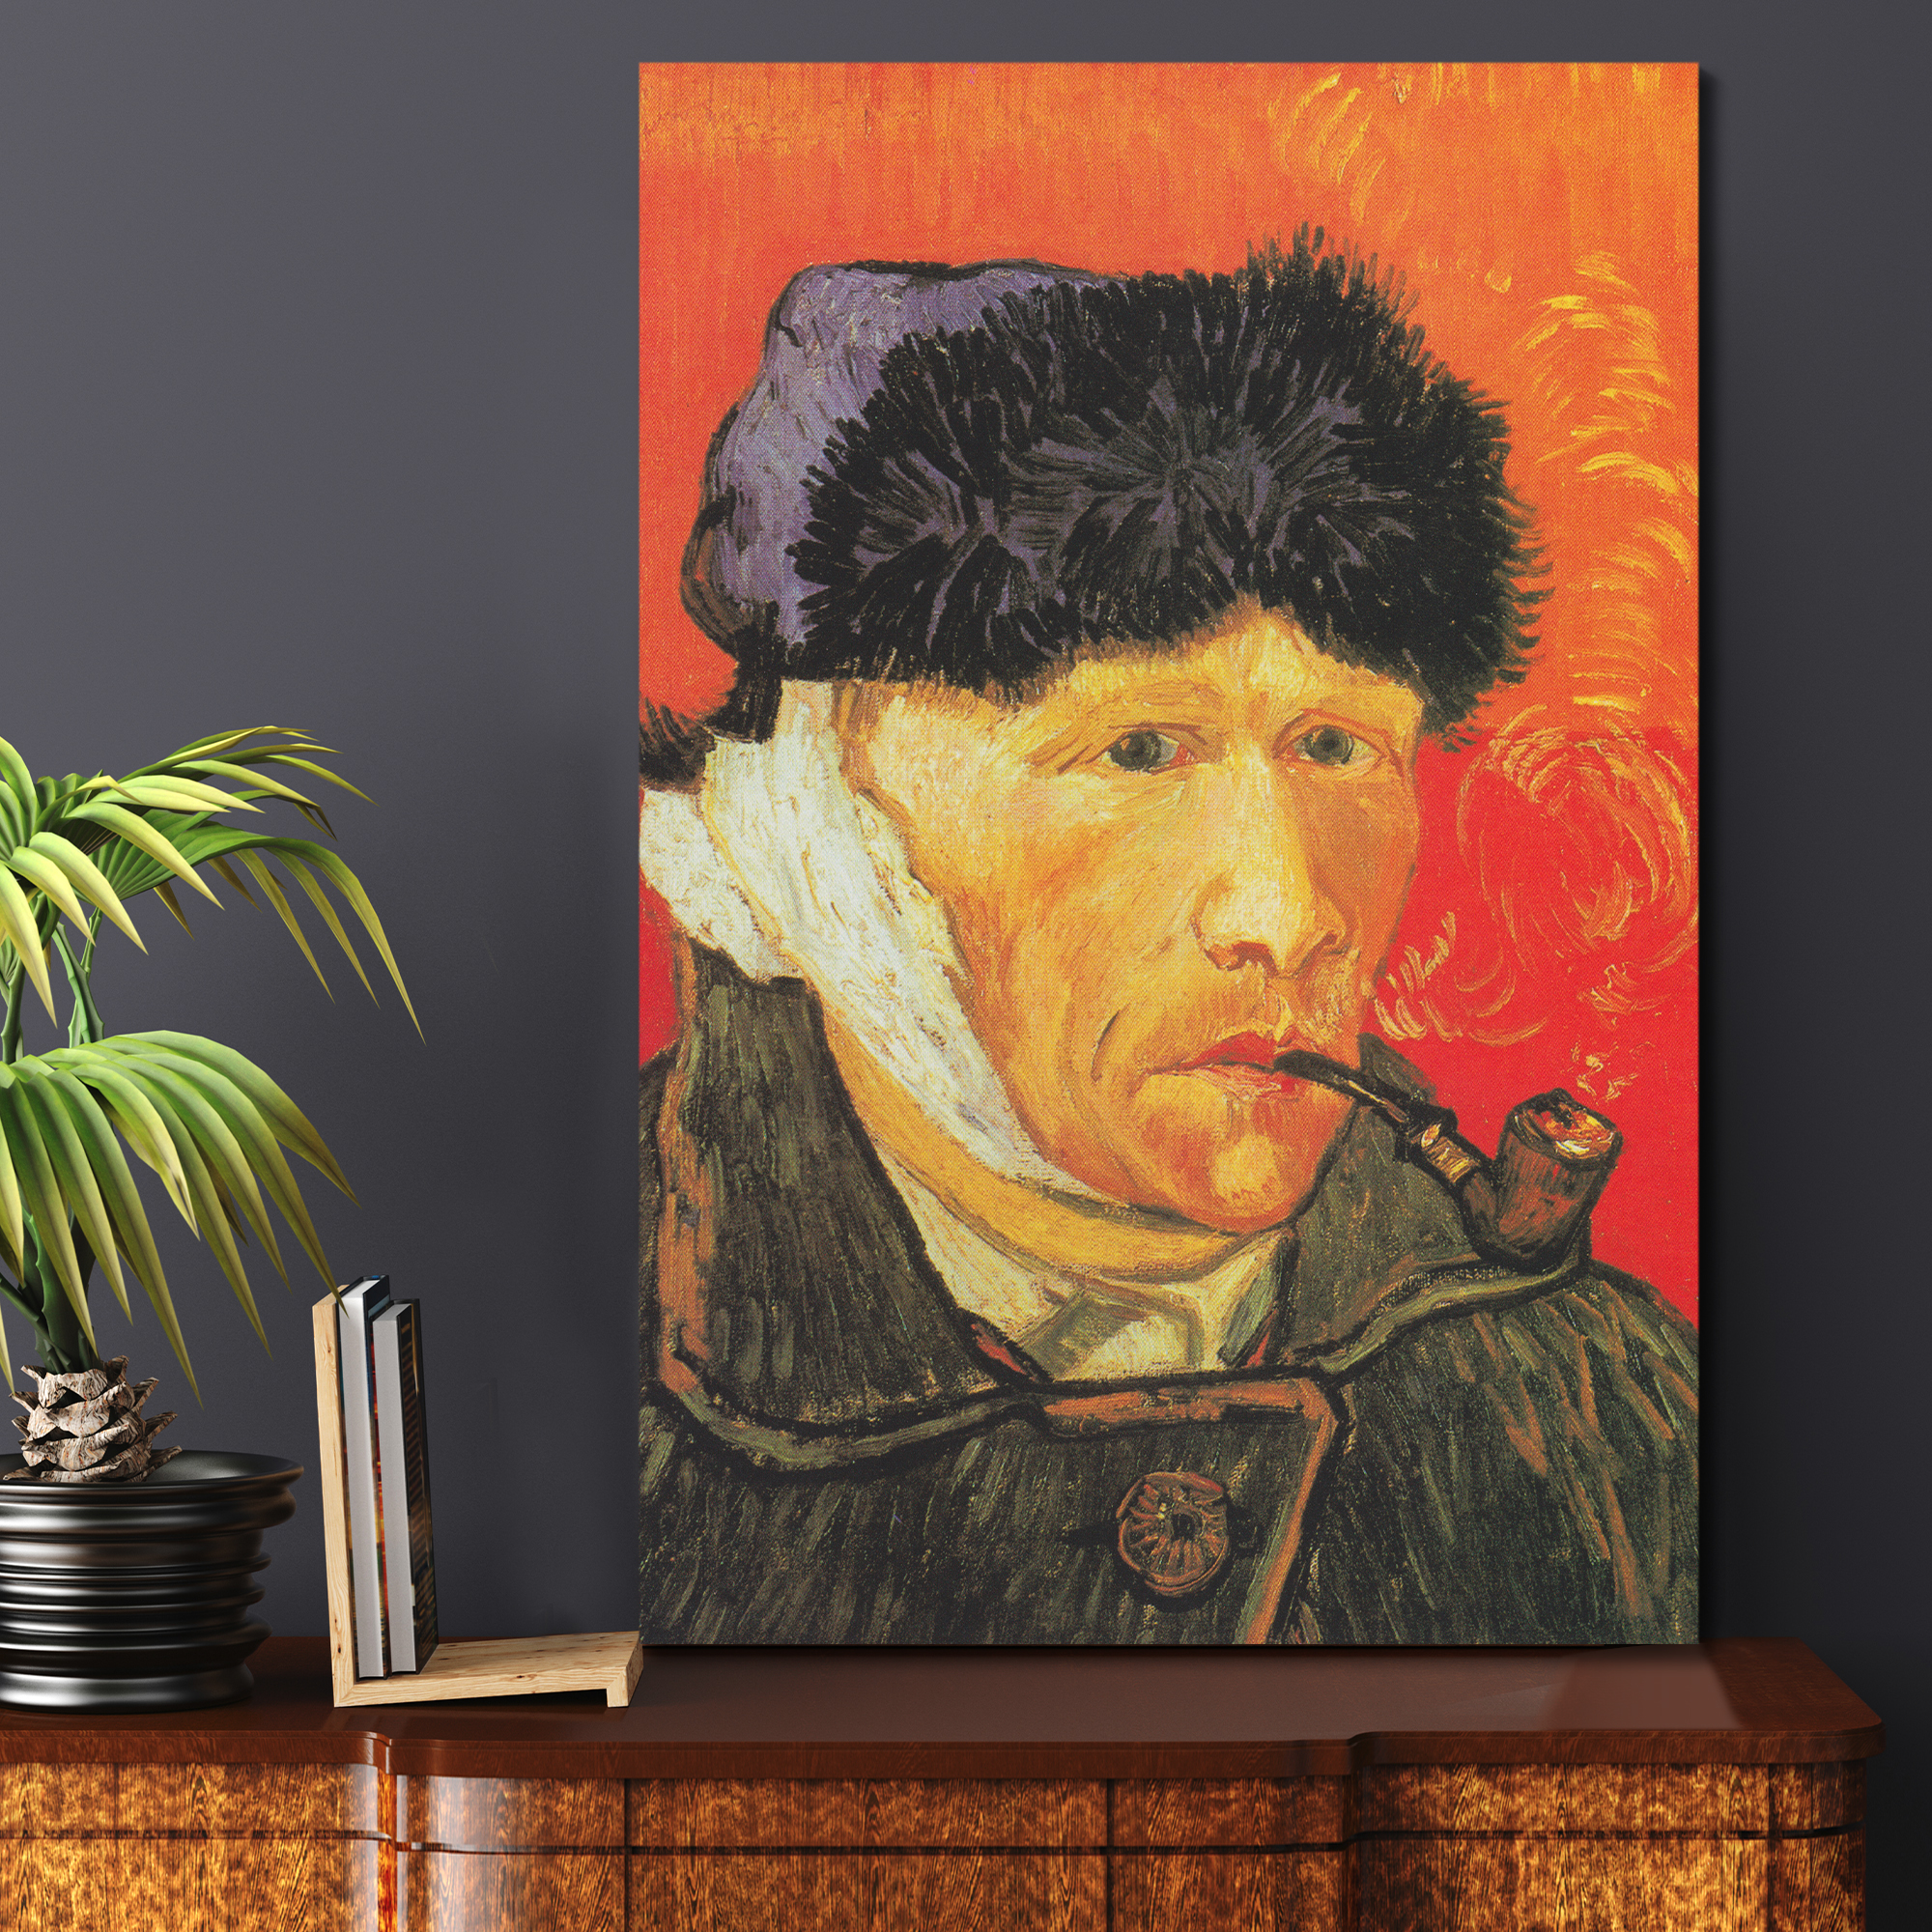 Portrait With Bandaged Ear by Vincent Van Gogh - Oil Painting Reproduction on Canvas Prints Wall Art, Ready to Hang - 24